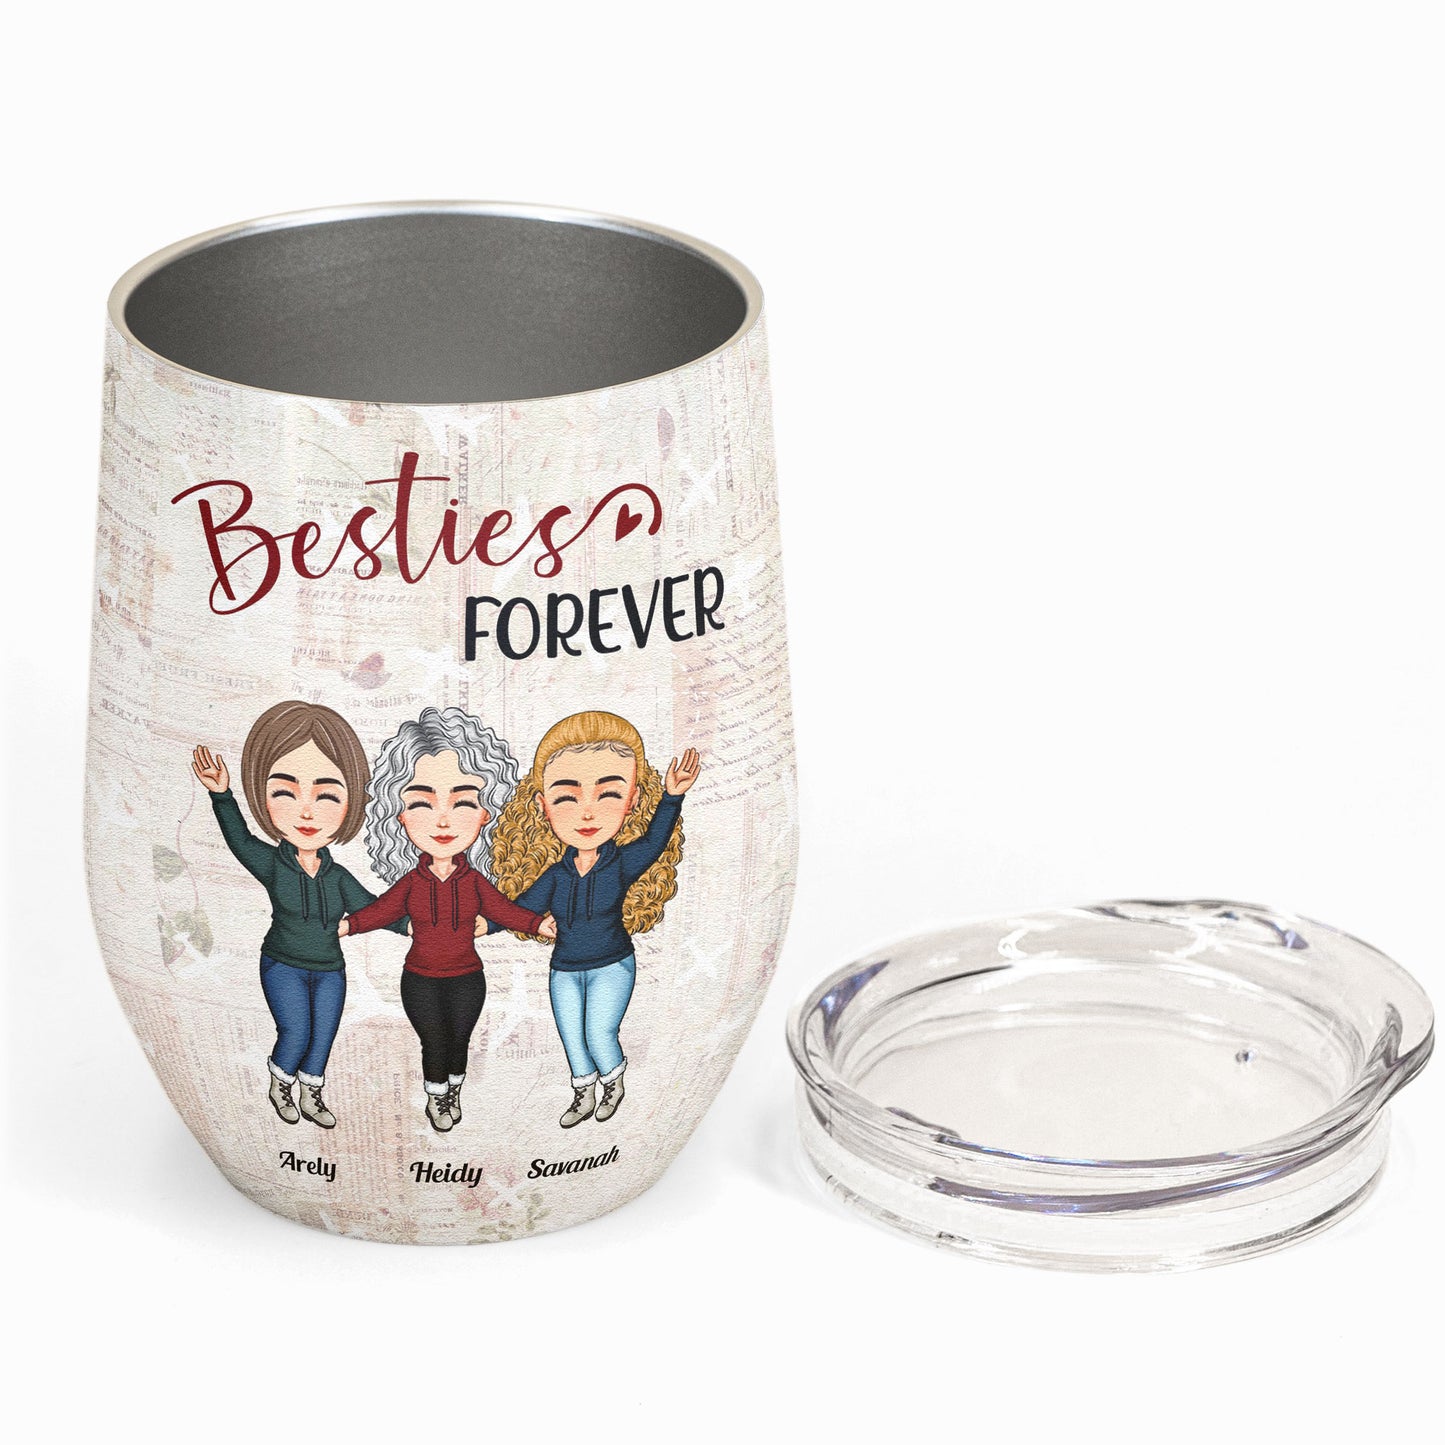 Miles Apart But Besties At Heart - Personalized Wine Tumbler - Birthday, Loving Gift For Best Friends, Bff, Besties, Soul Sisters